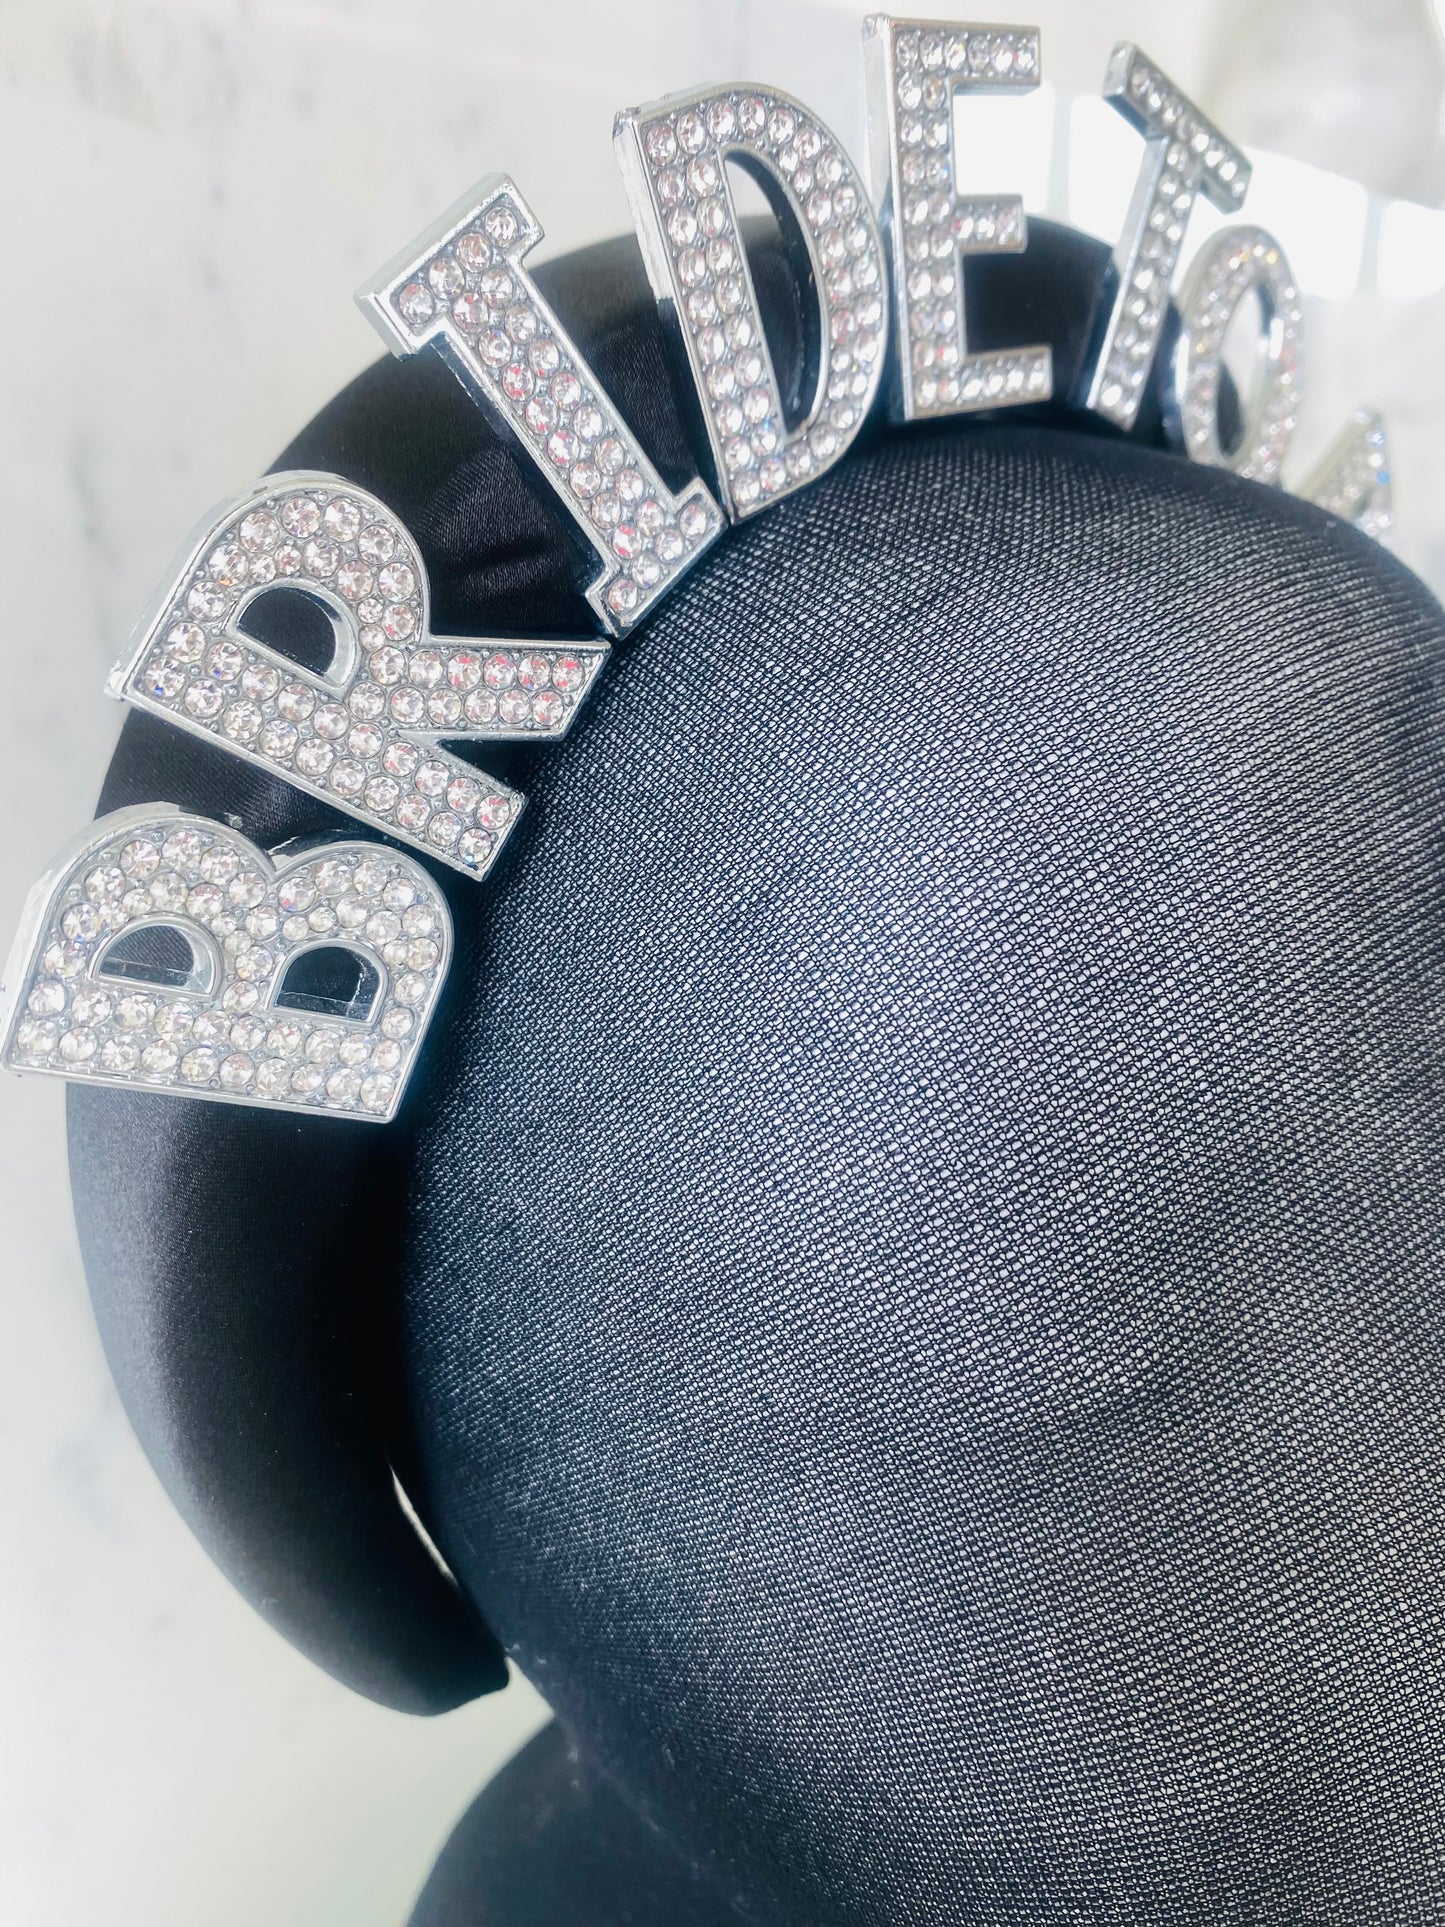 BRIDE TO BE CROWN